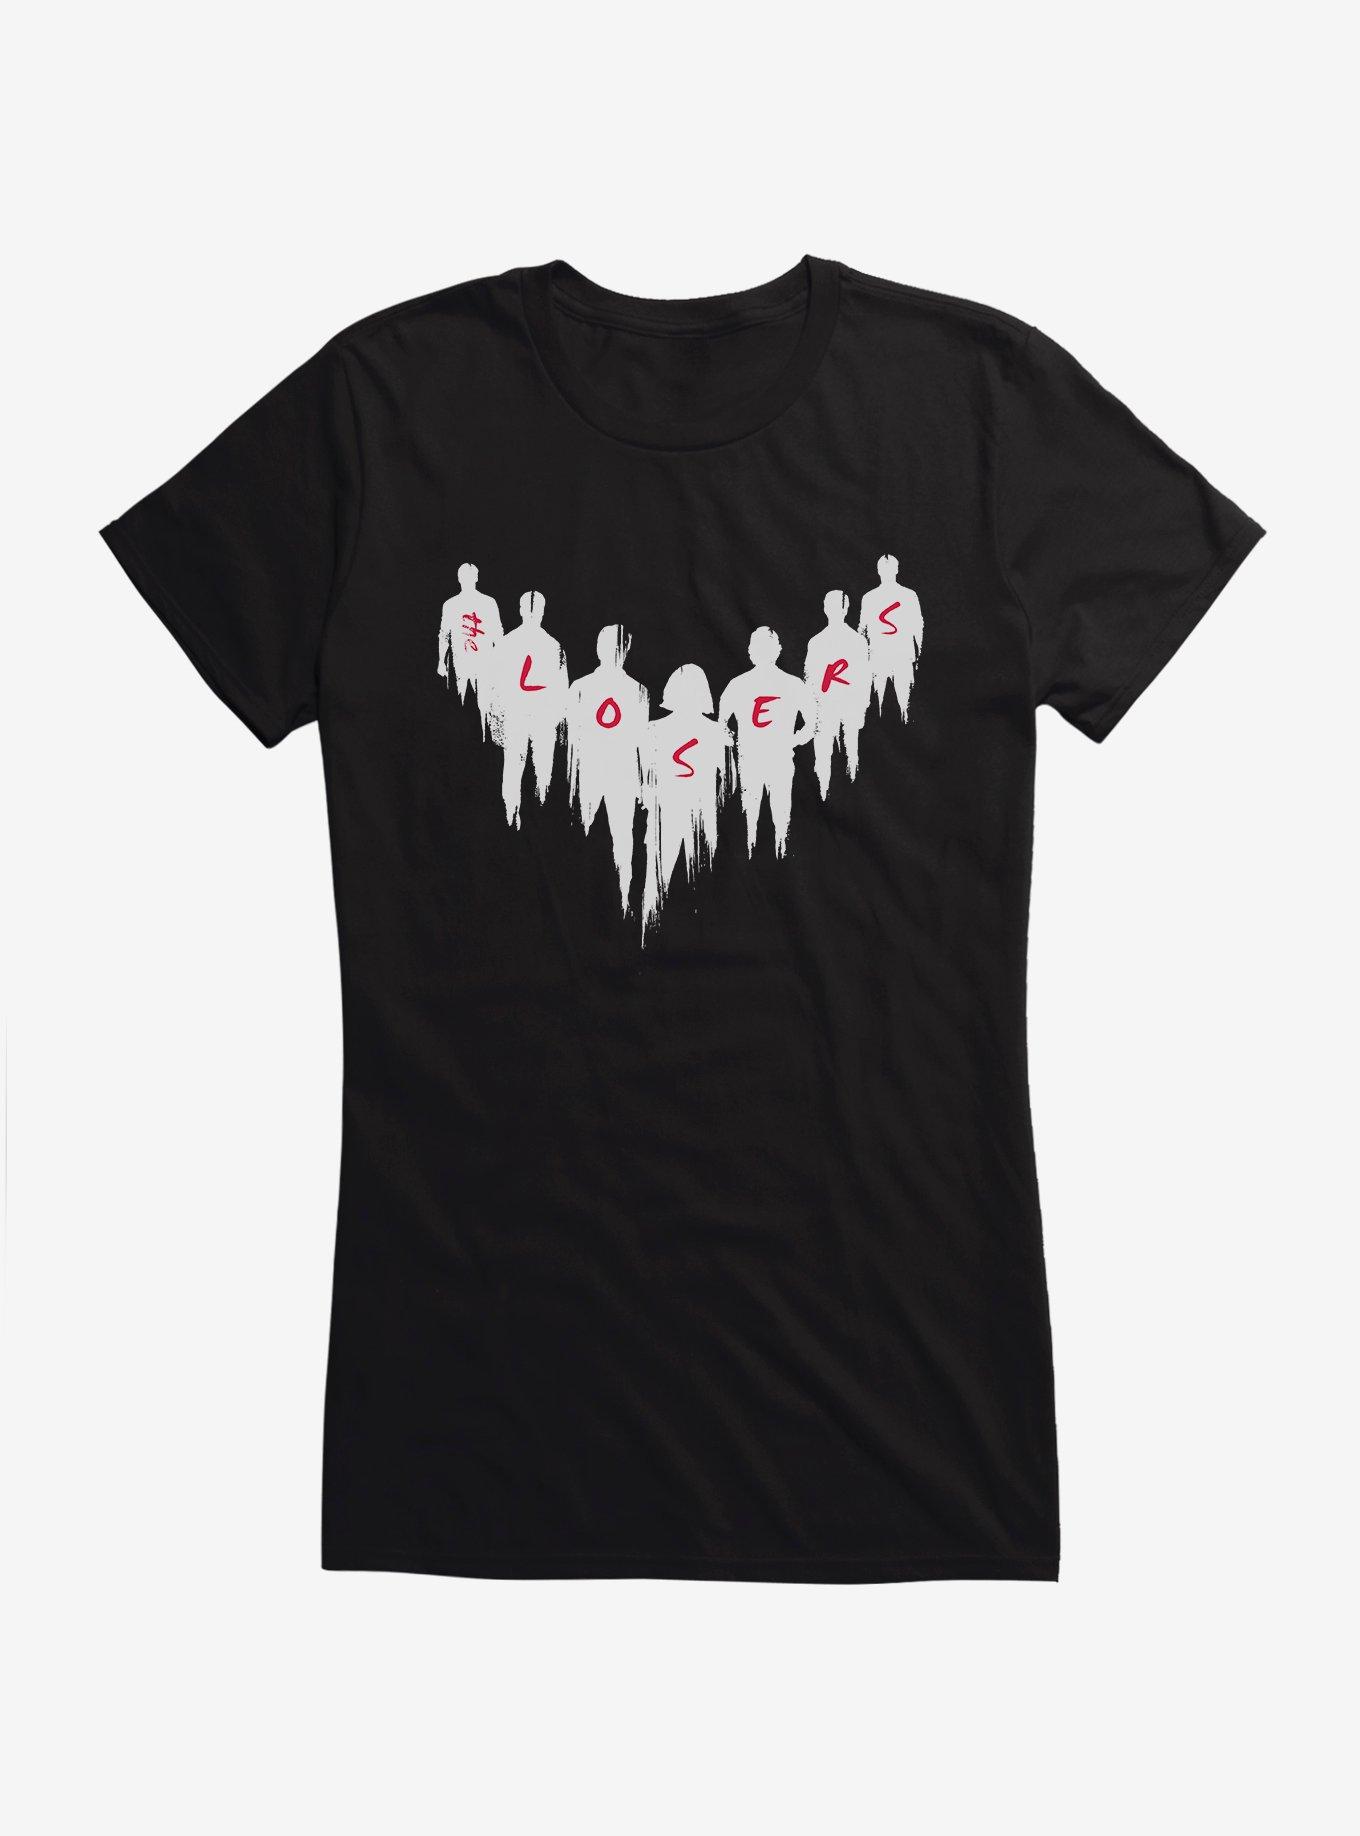 IT Chapter Two The Losers Group Girls T-Shirt, BLACK, hi-res